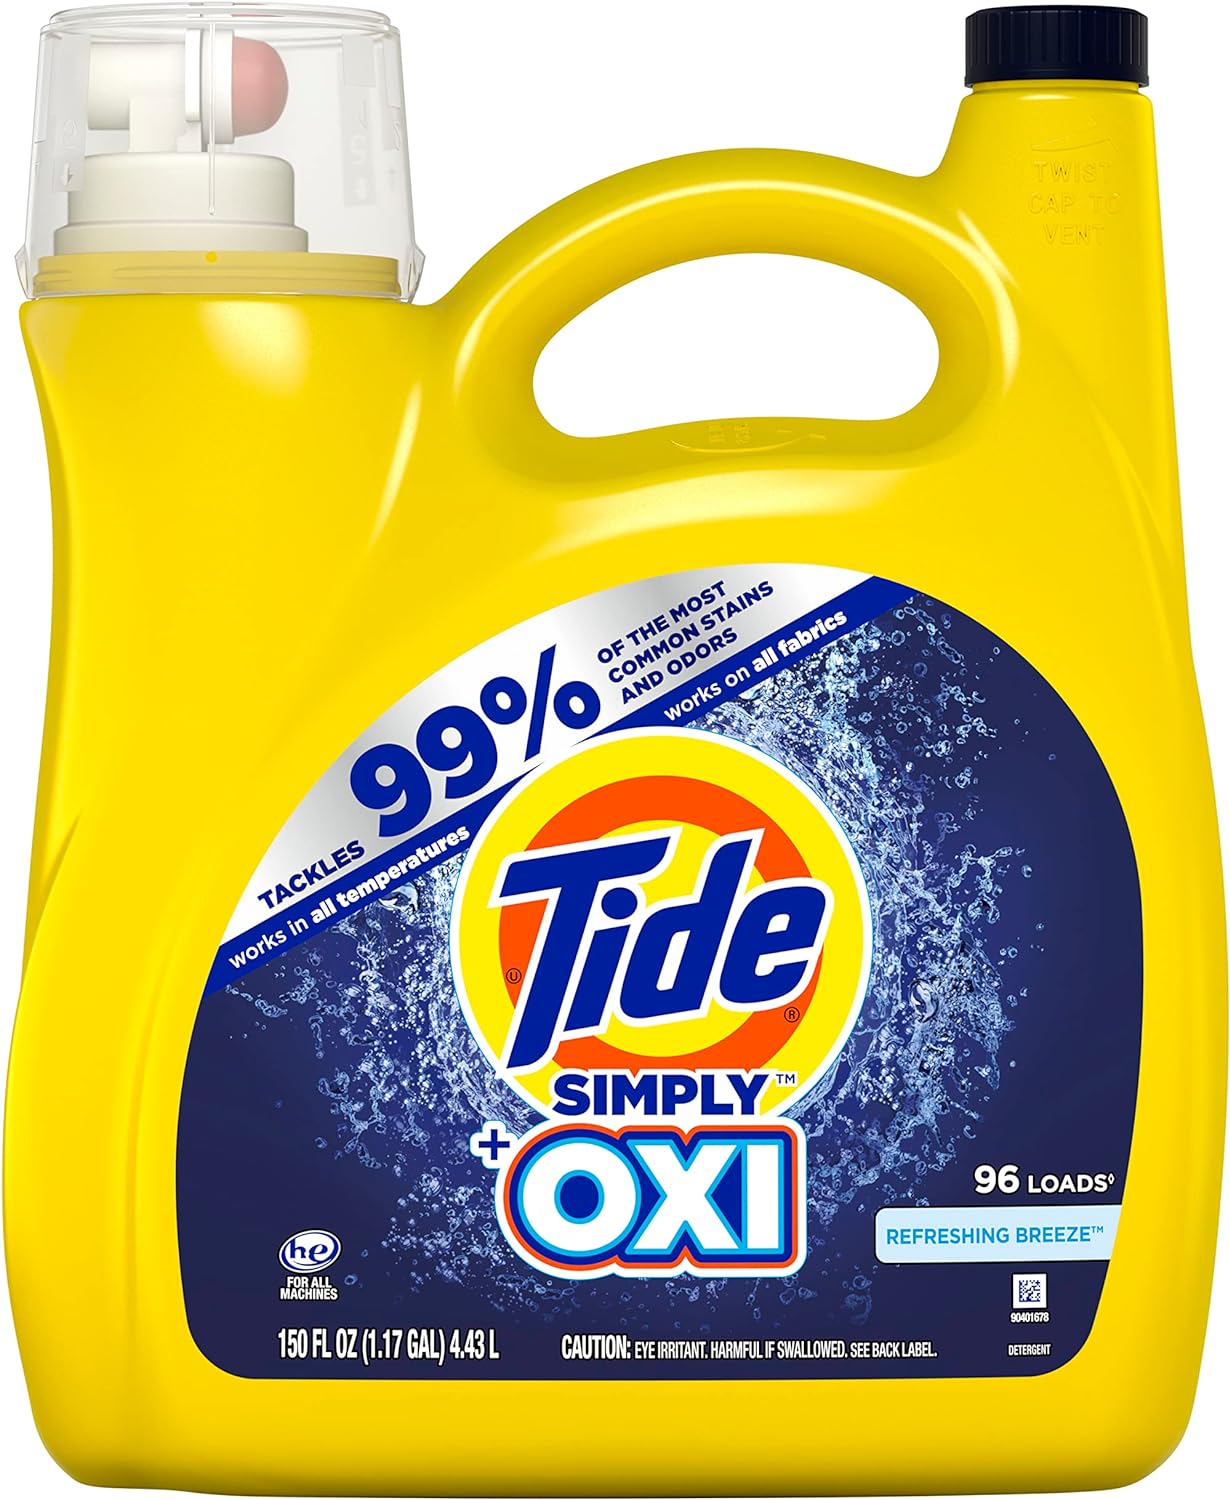 Tide Simply + Oxi Liquid Laundry Detergent, 96 loads - Save $10 when you buy 3